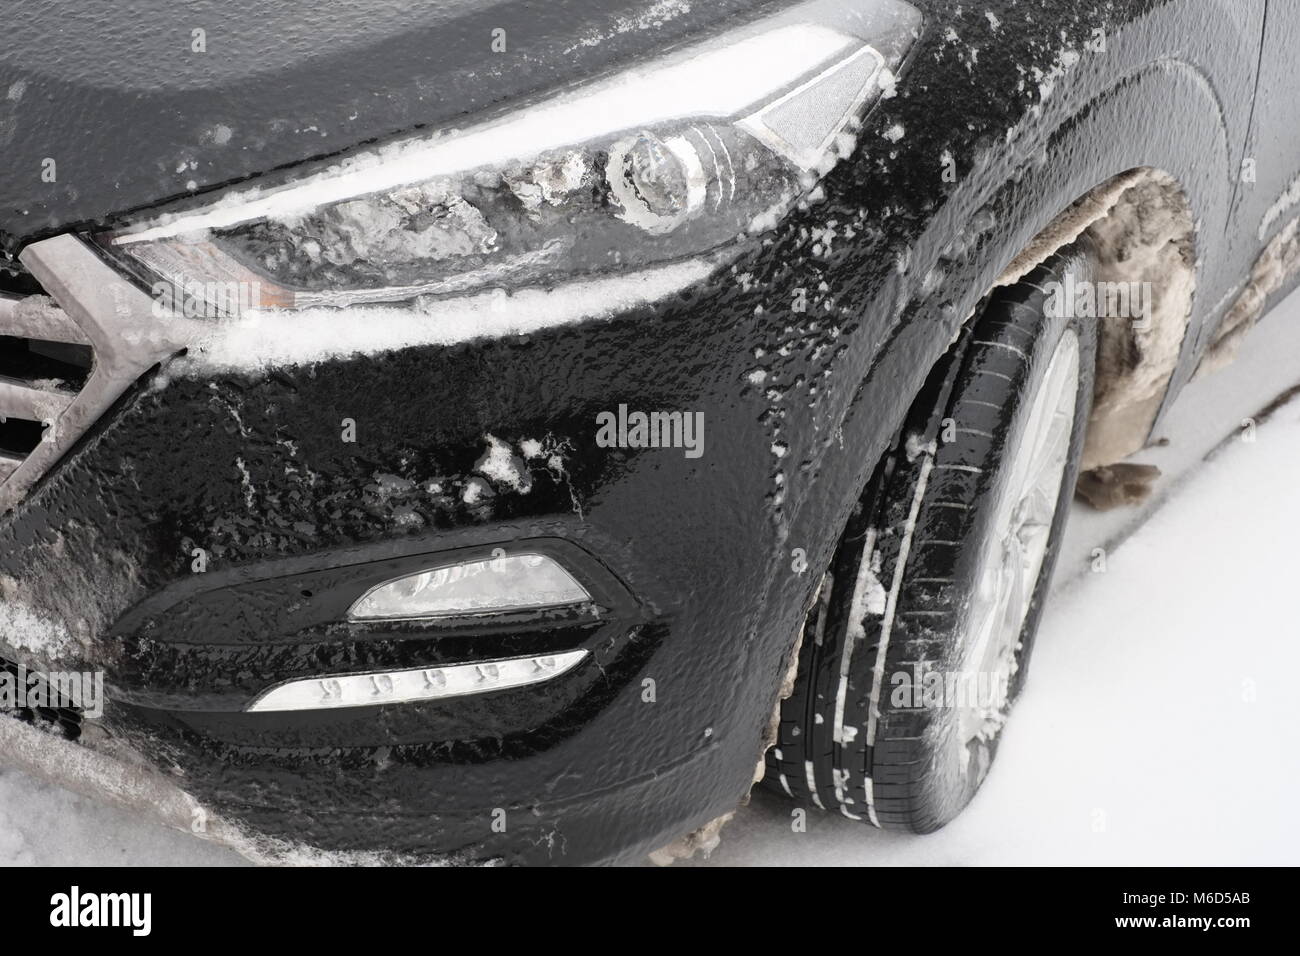 Weston super mare. UK. 2nd March, 2018. The effects of the previous nights snowfall and freezing rain on a parked car. Credit: Alamy Live News Stock Photo